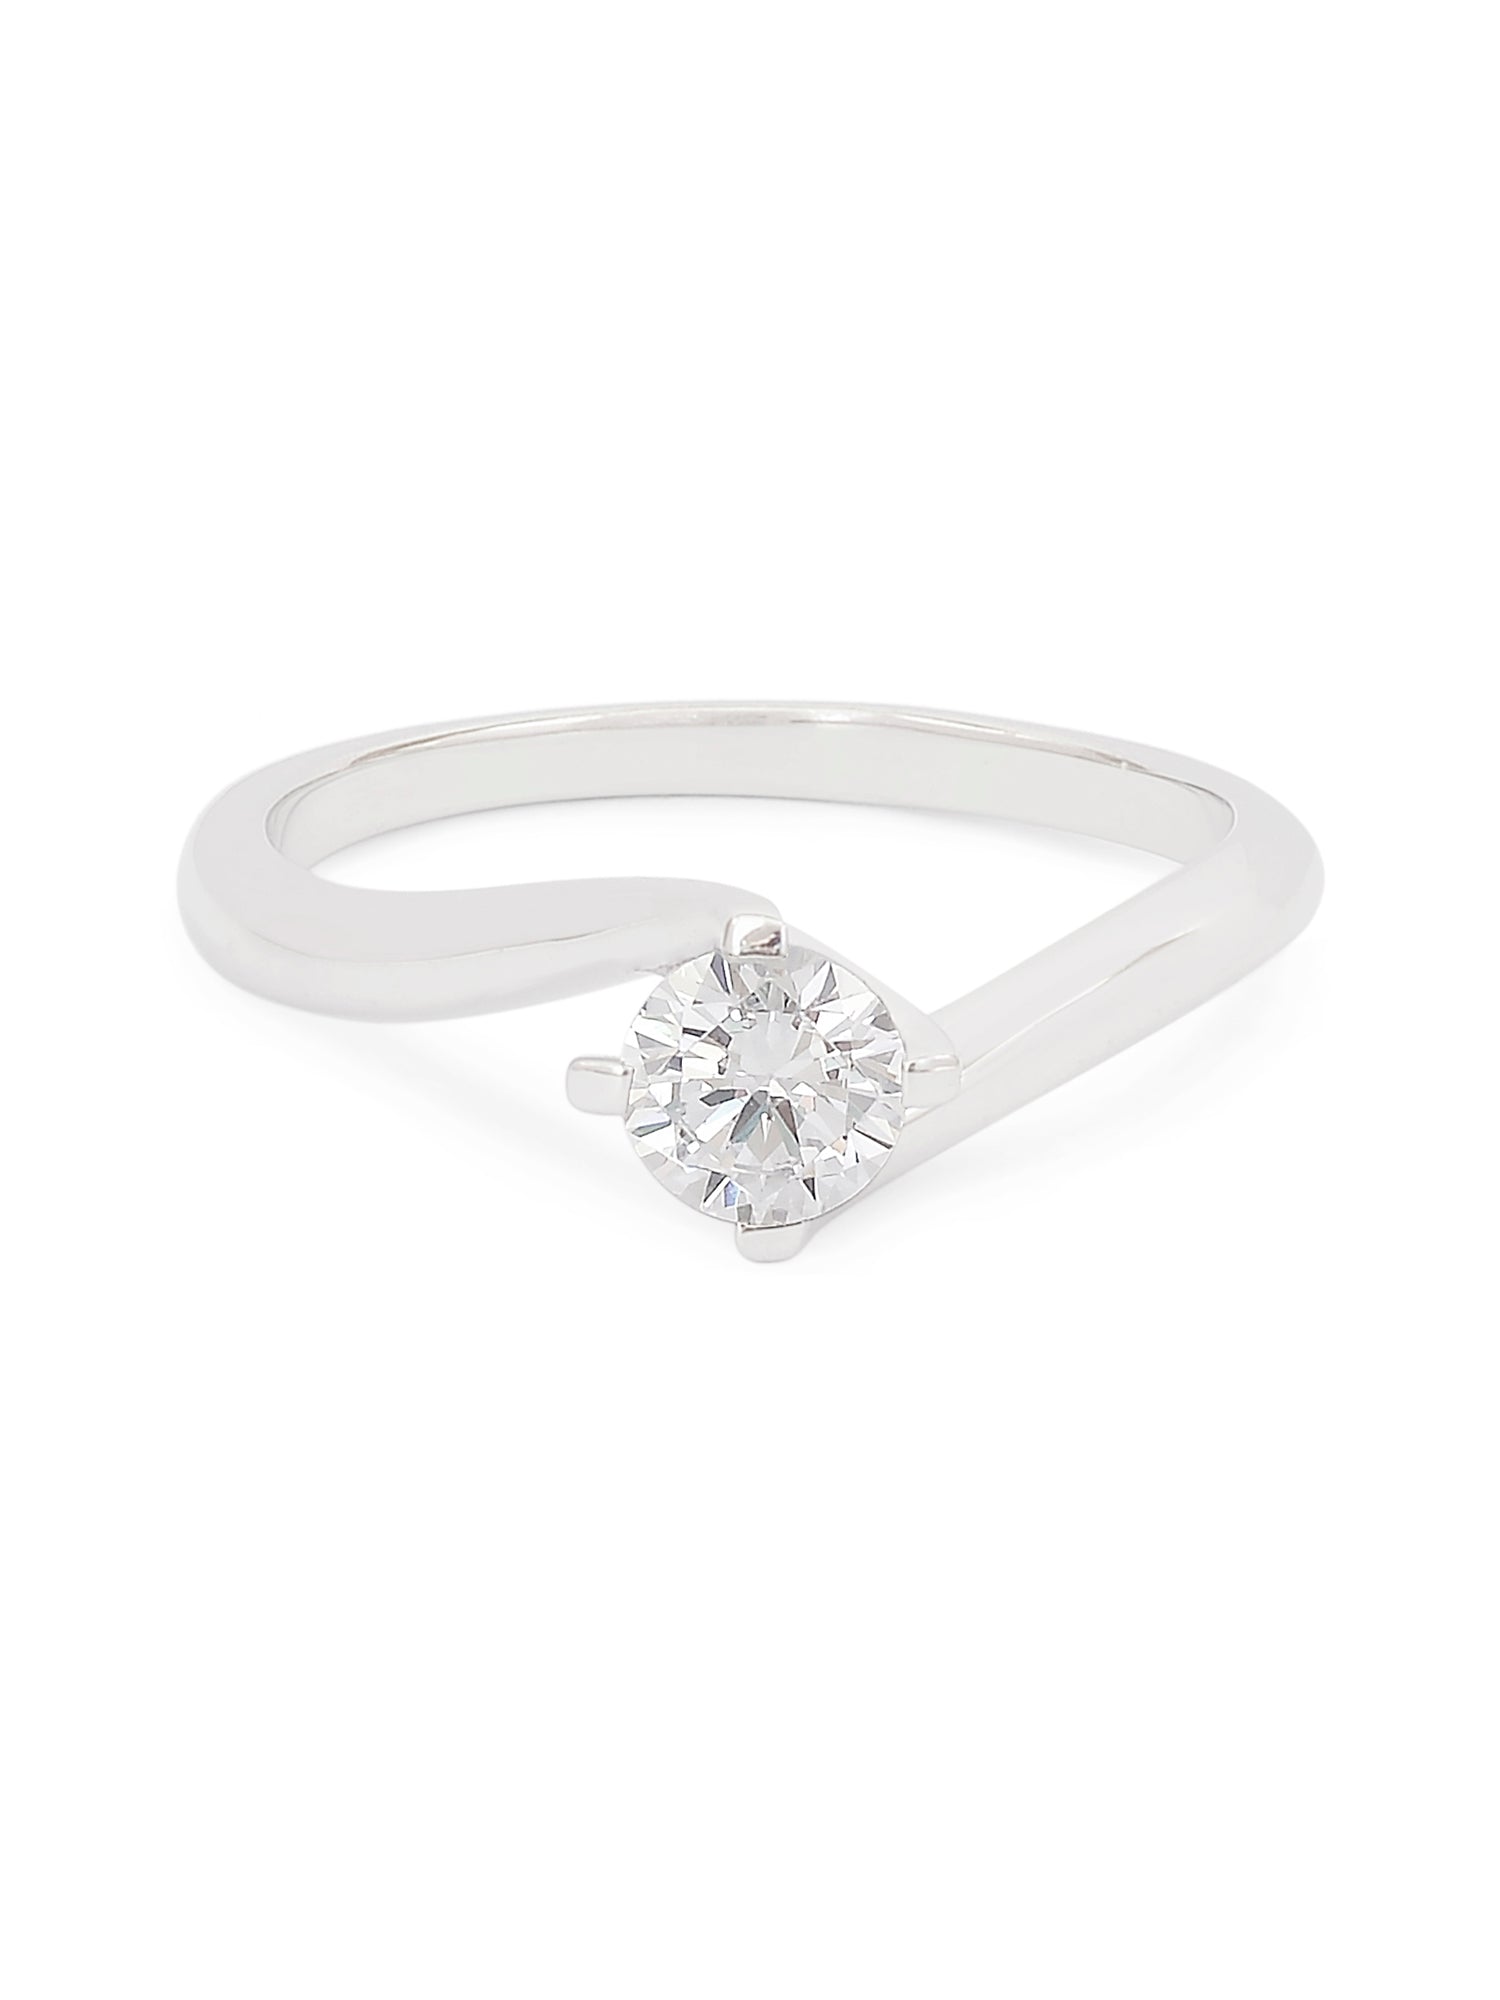 ORNATE JEWELS 1 CARAT SOLITAIRE PROPOSAL RING